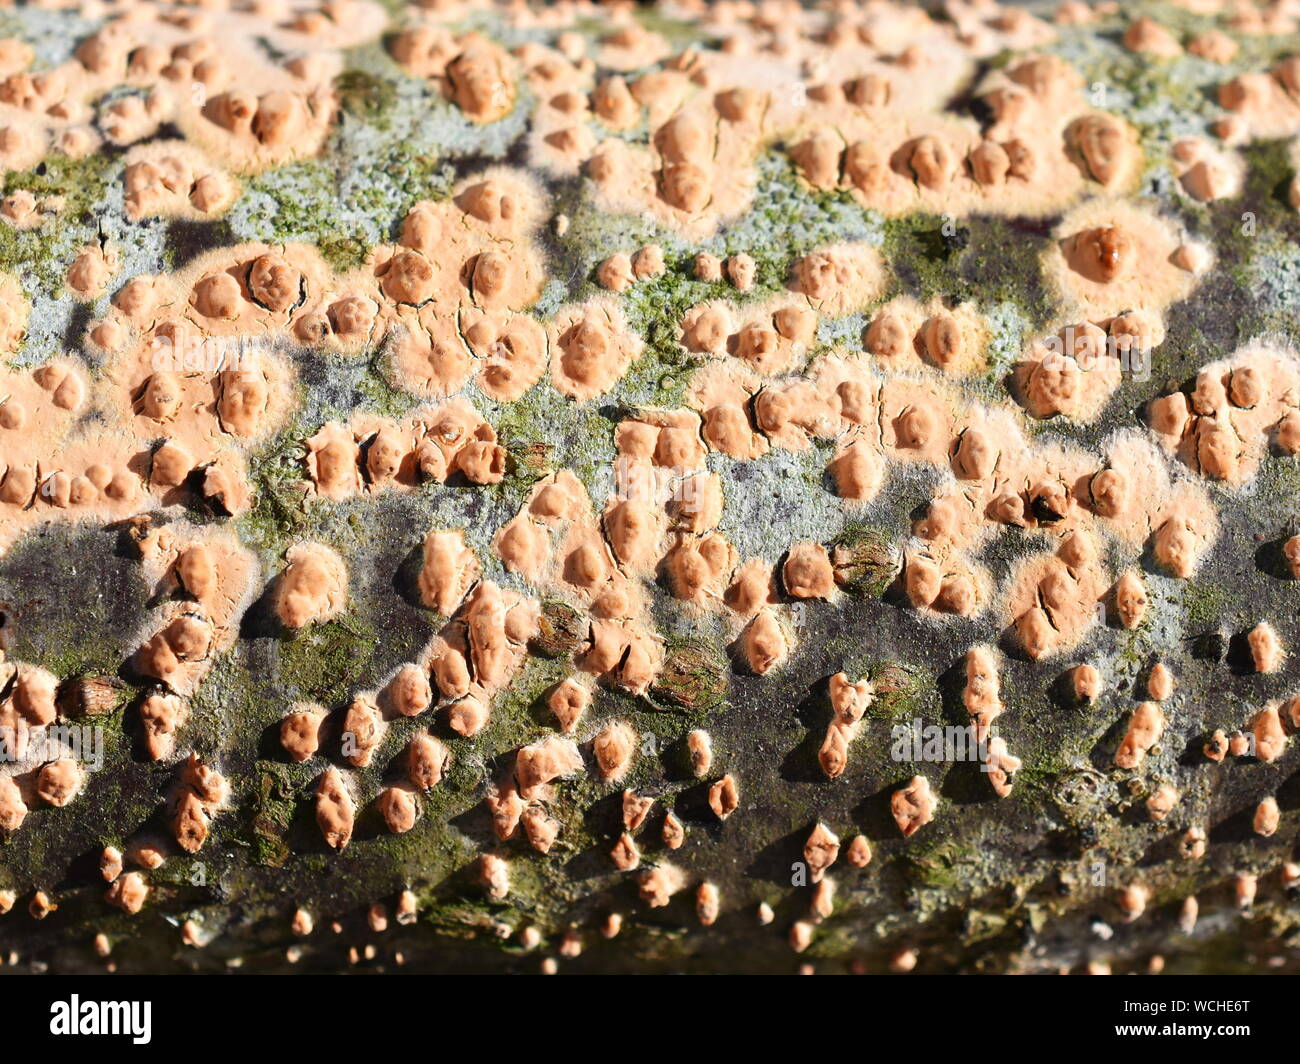 Coral spot fungus Nectria cinnabarina growing on a piece of dead wood Stock Photo